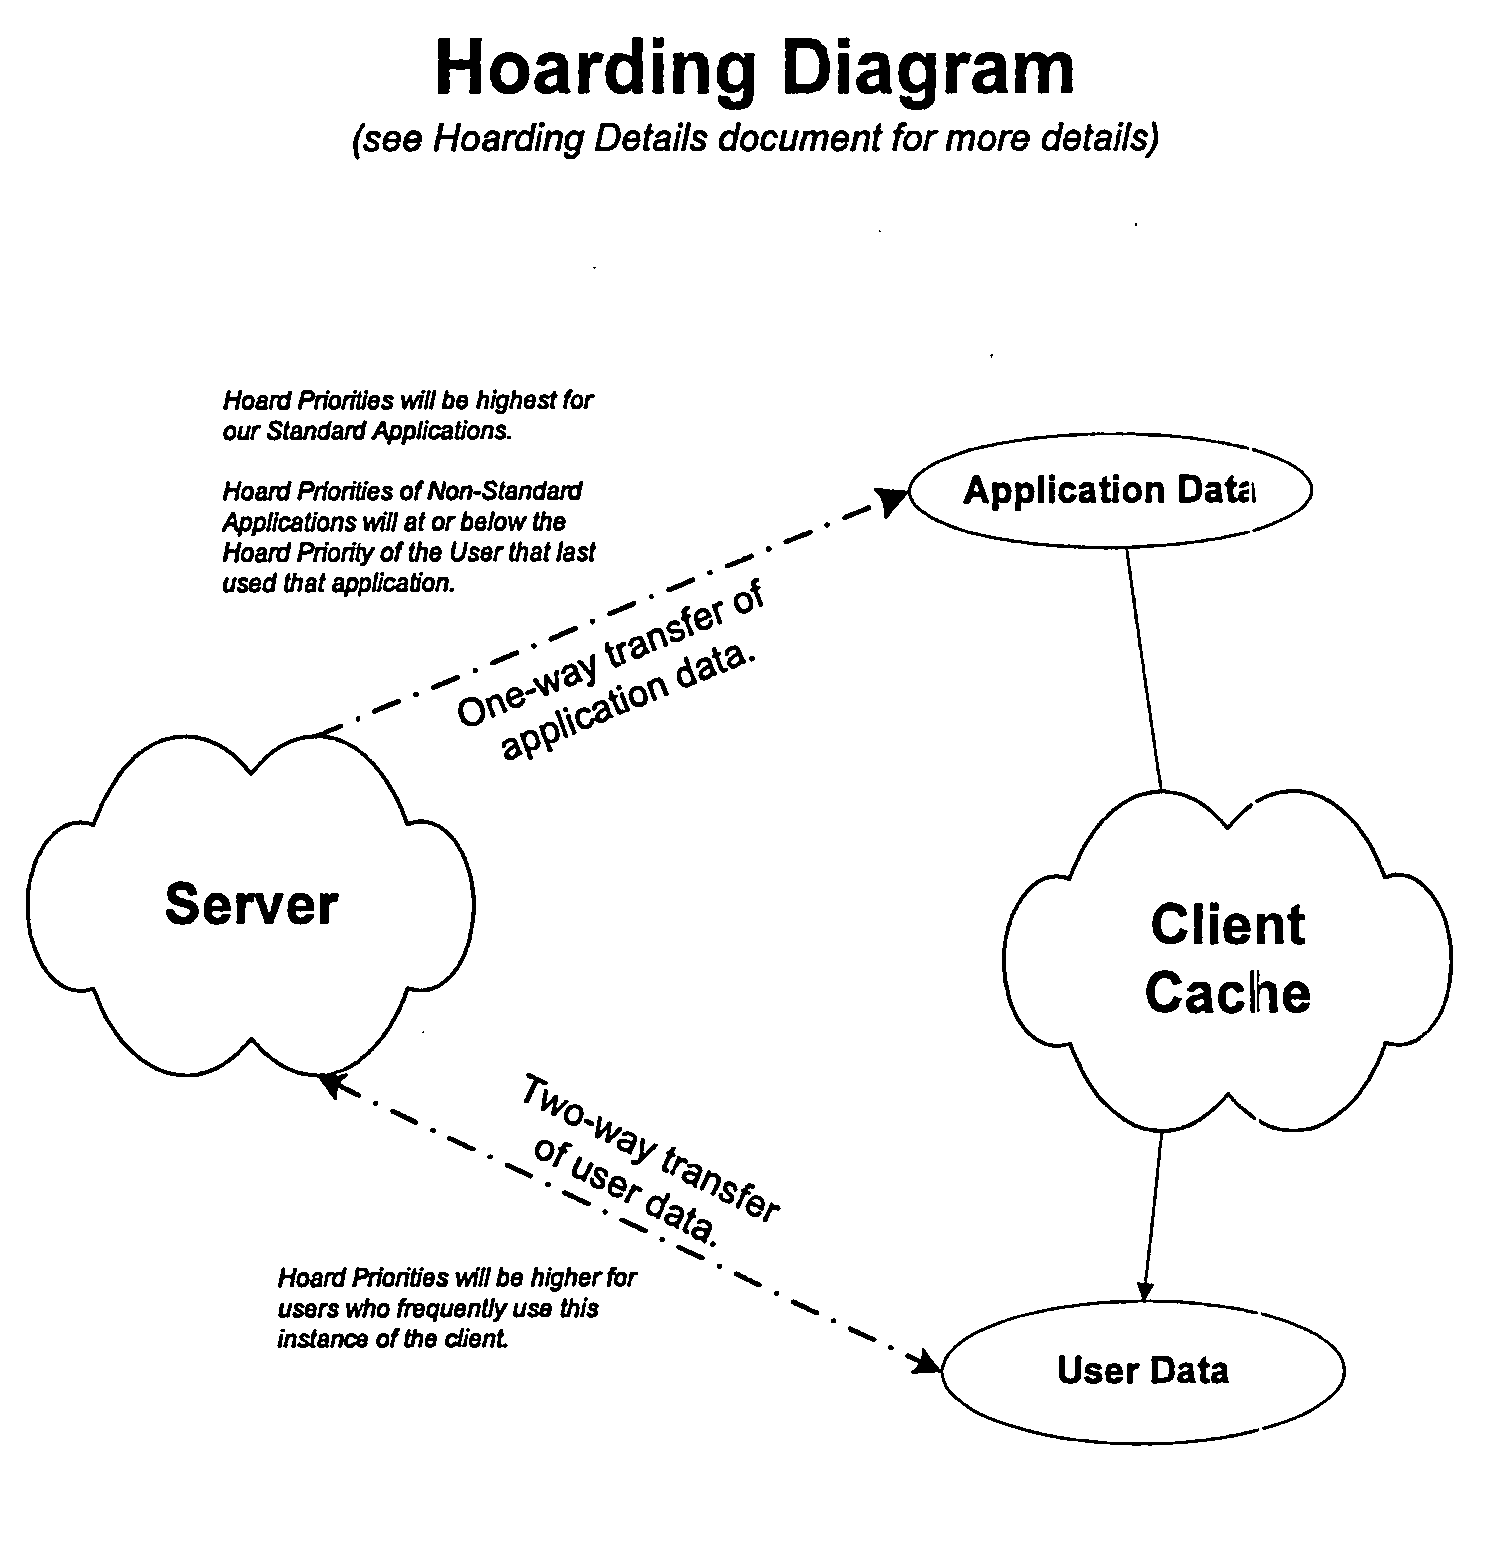 Method for electronically packaging a user's personal computing environment on a computer or device, and mobilizing it for transfer over a network